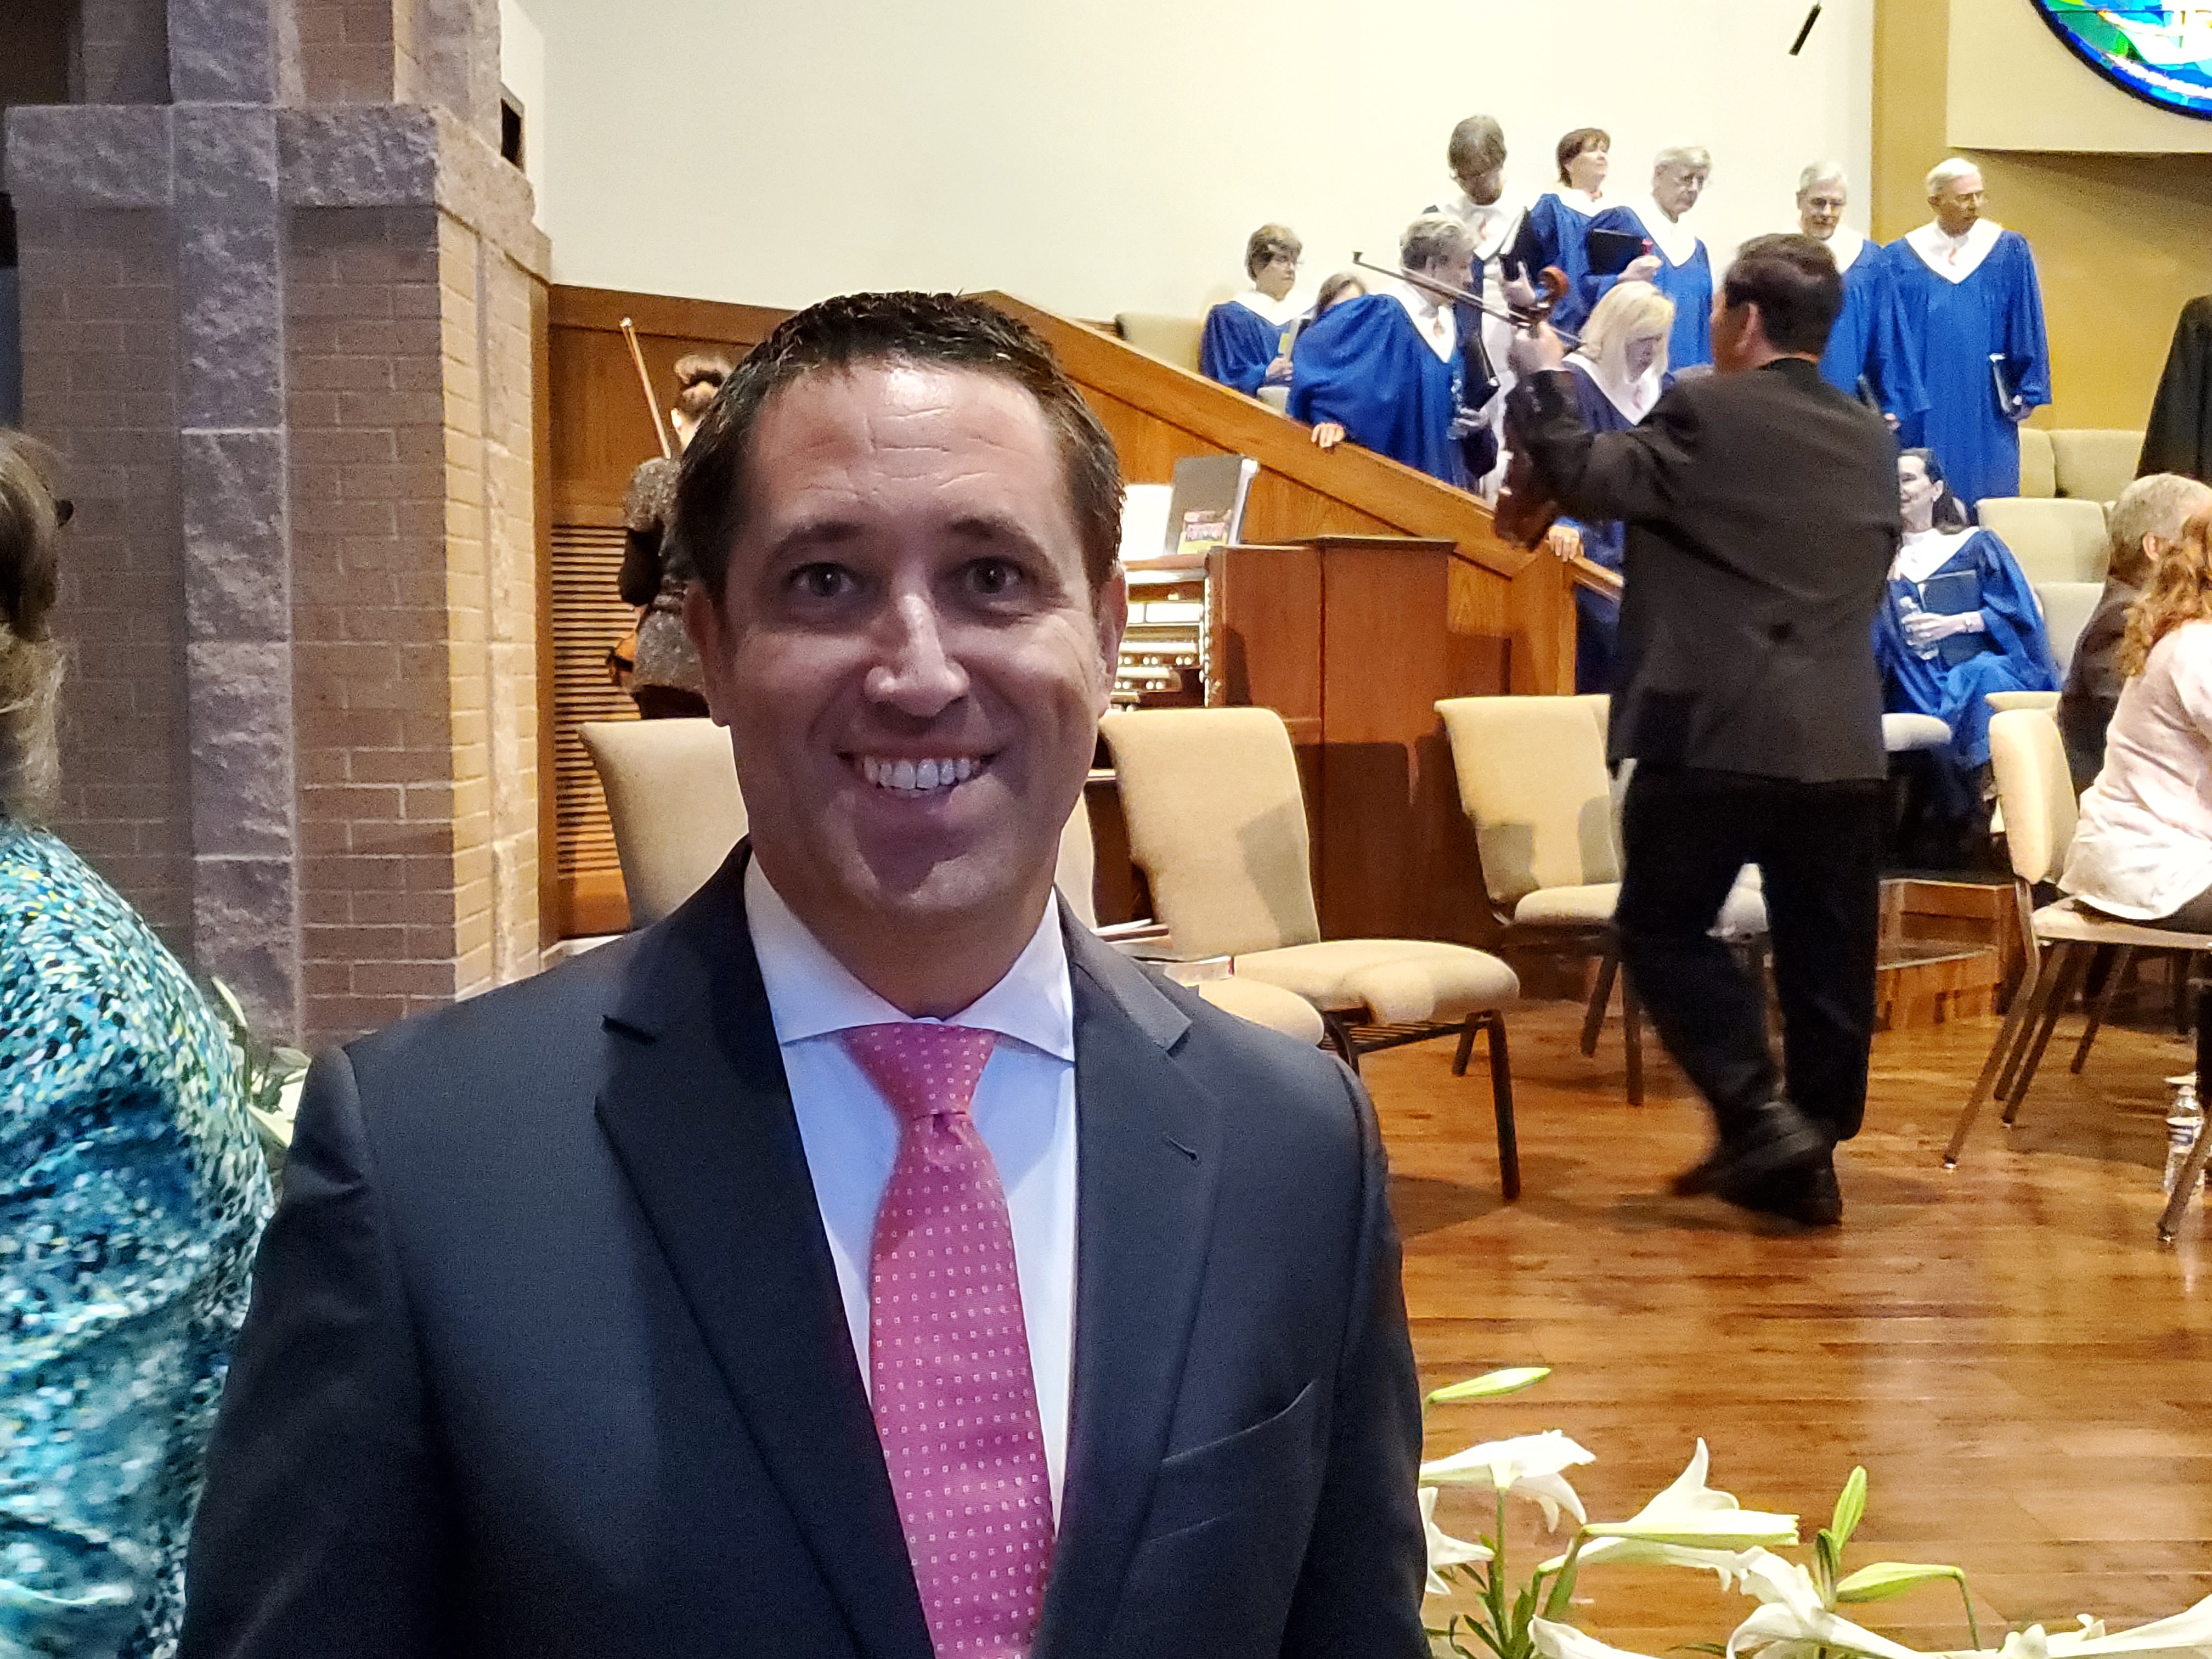 Glenn Hegar stands in front of the church altar. Several Choir members in robes can be seen in the background as well as other church attendees.